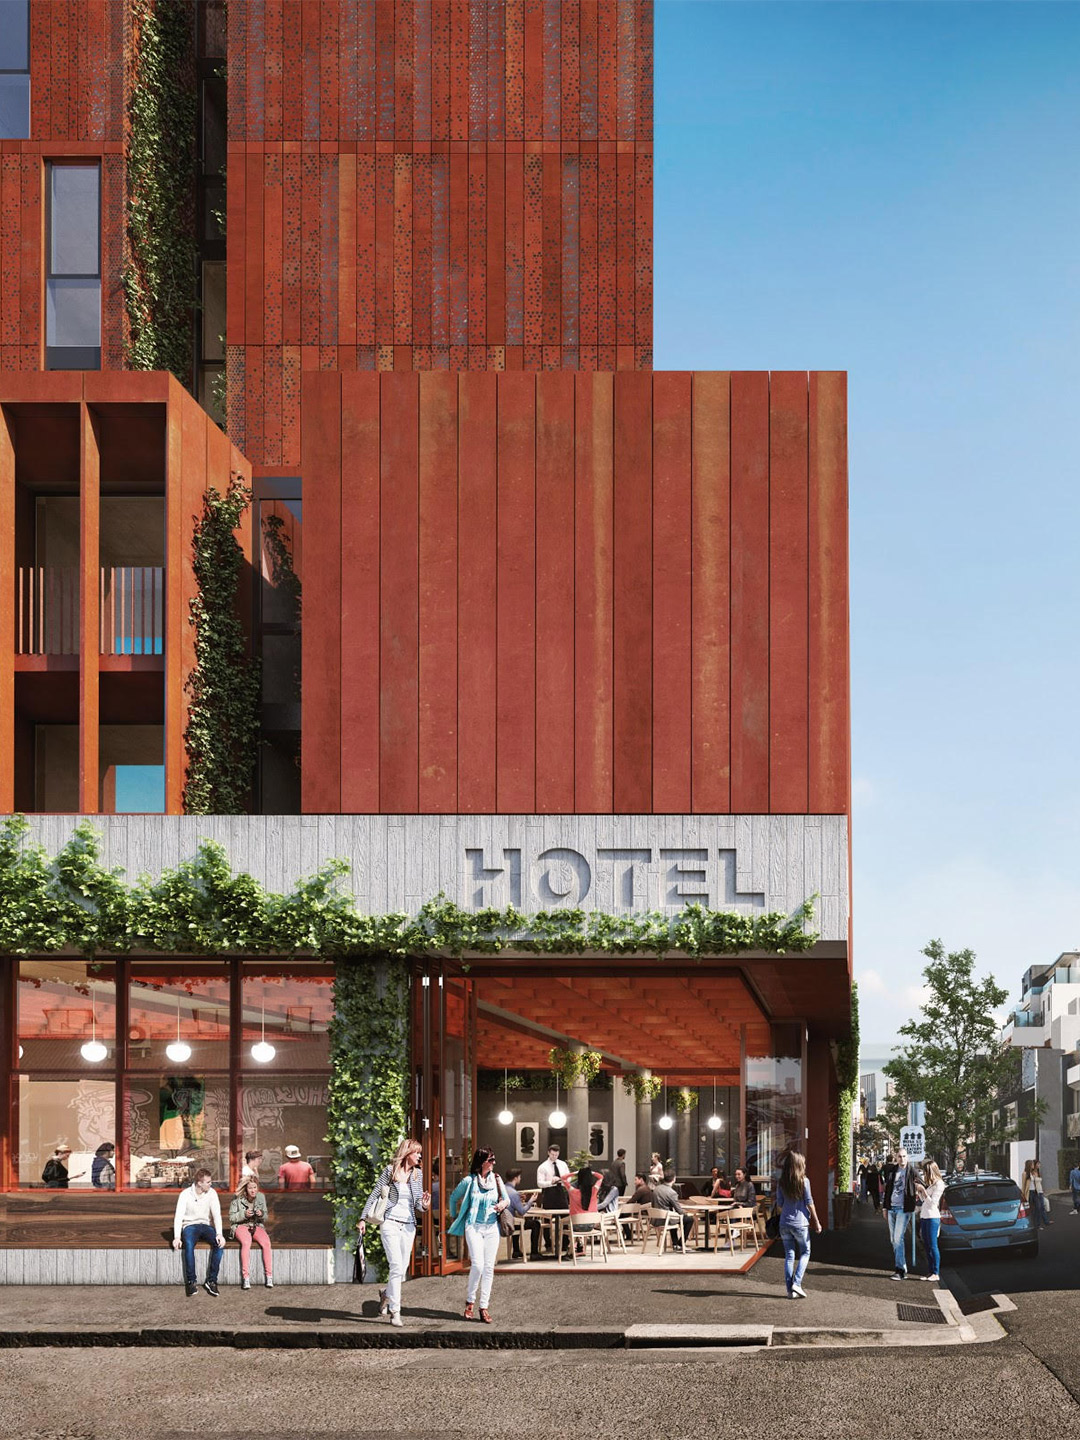 The Standard Hotel in Fitzroy, Melbourne